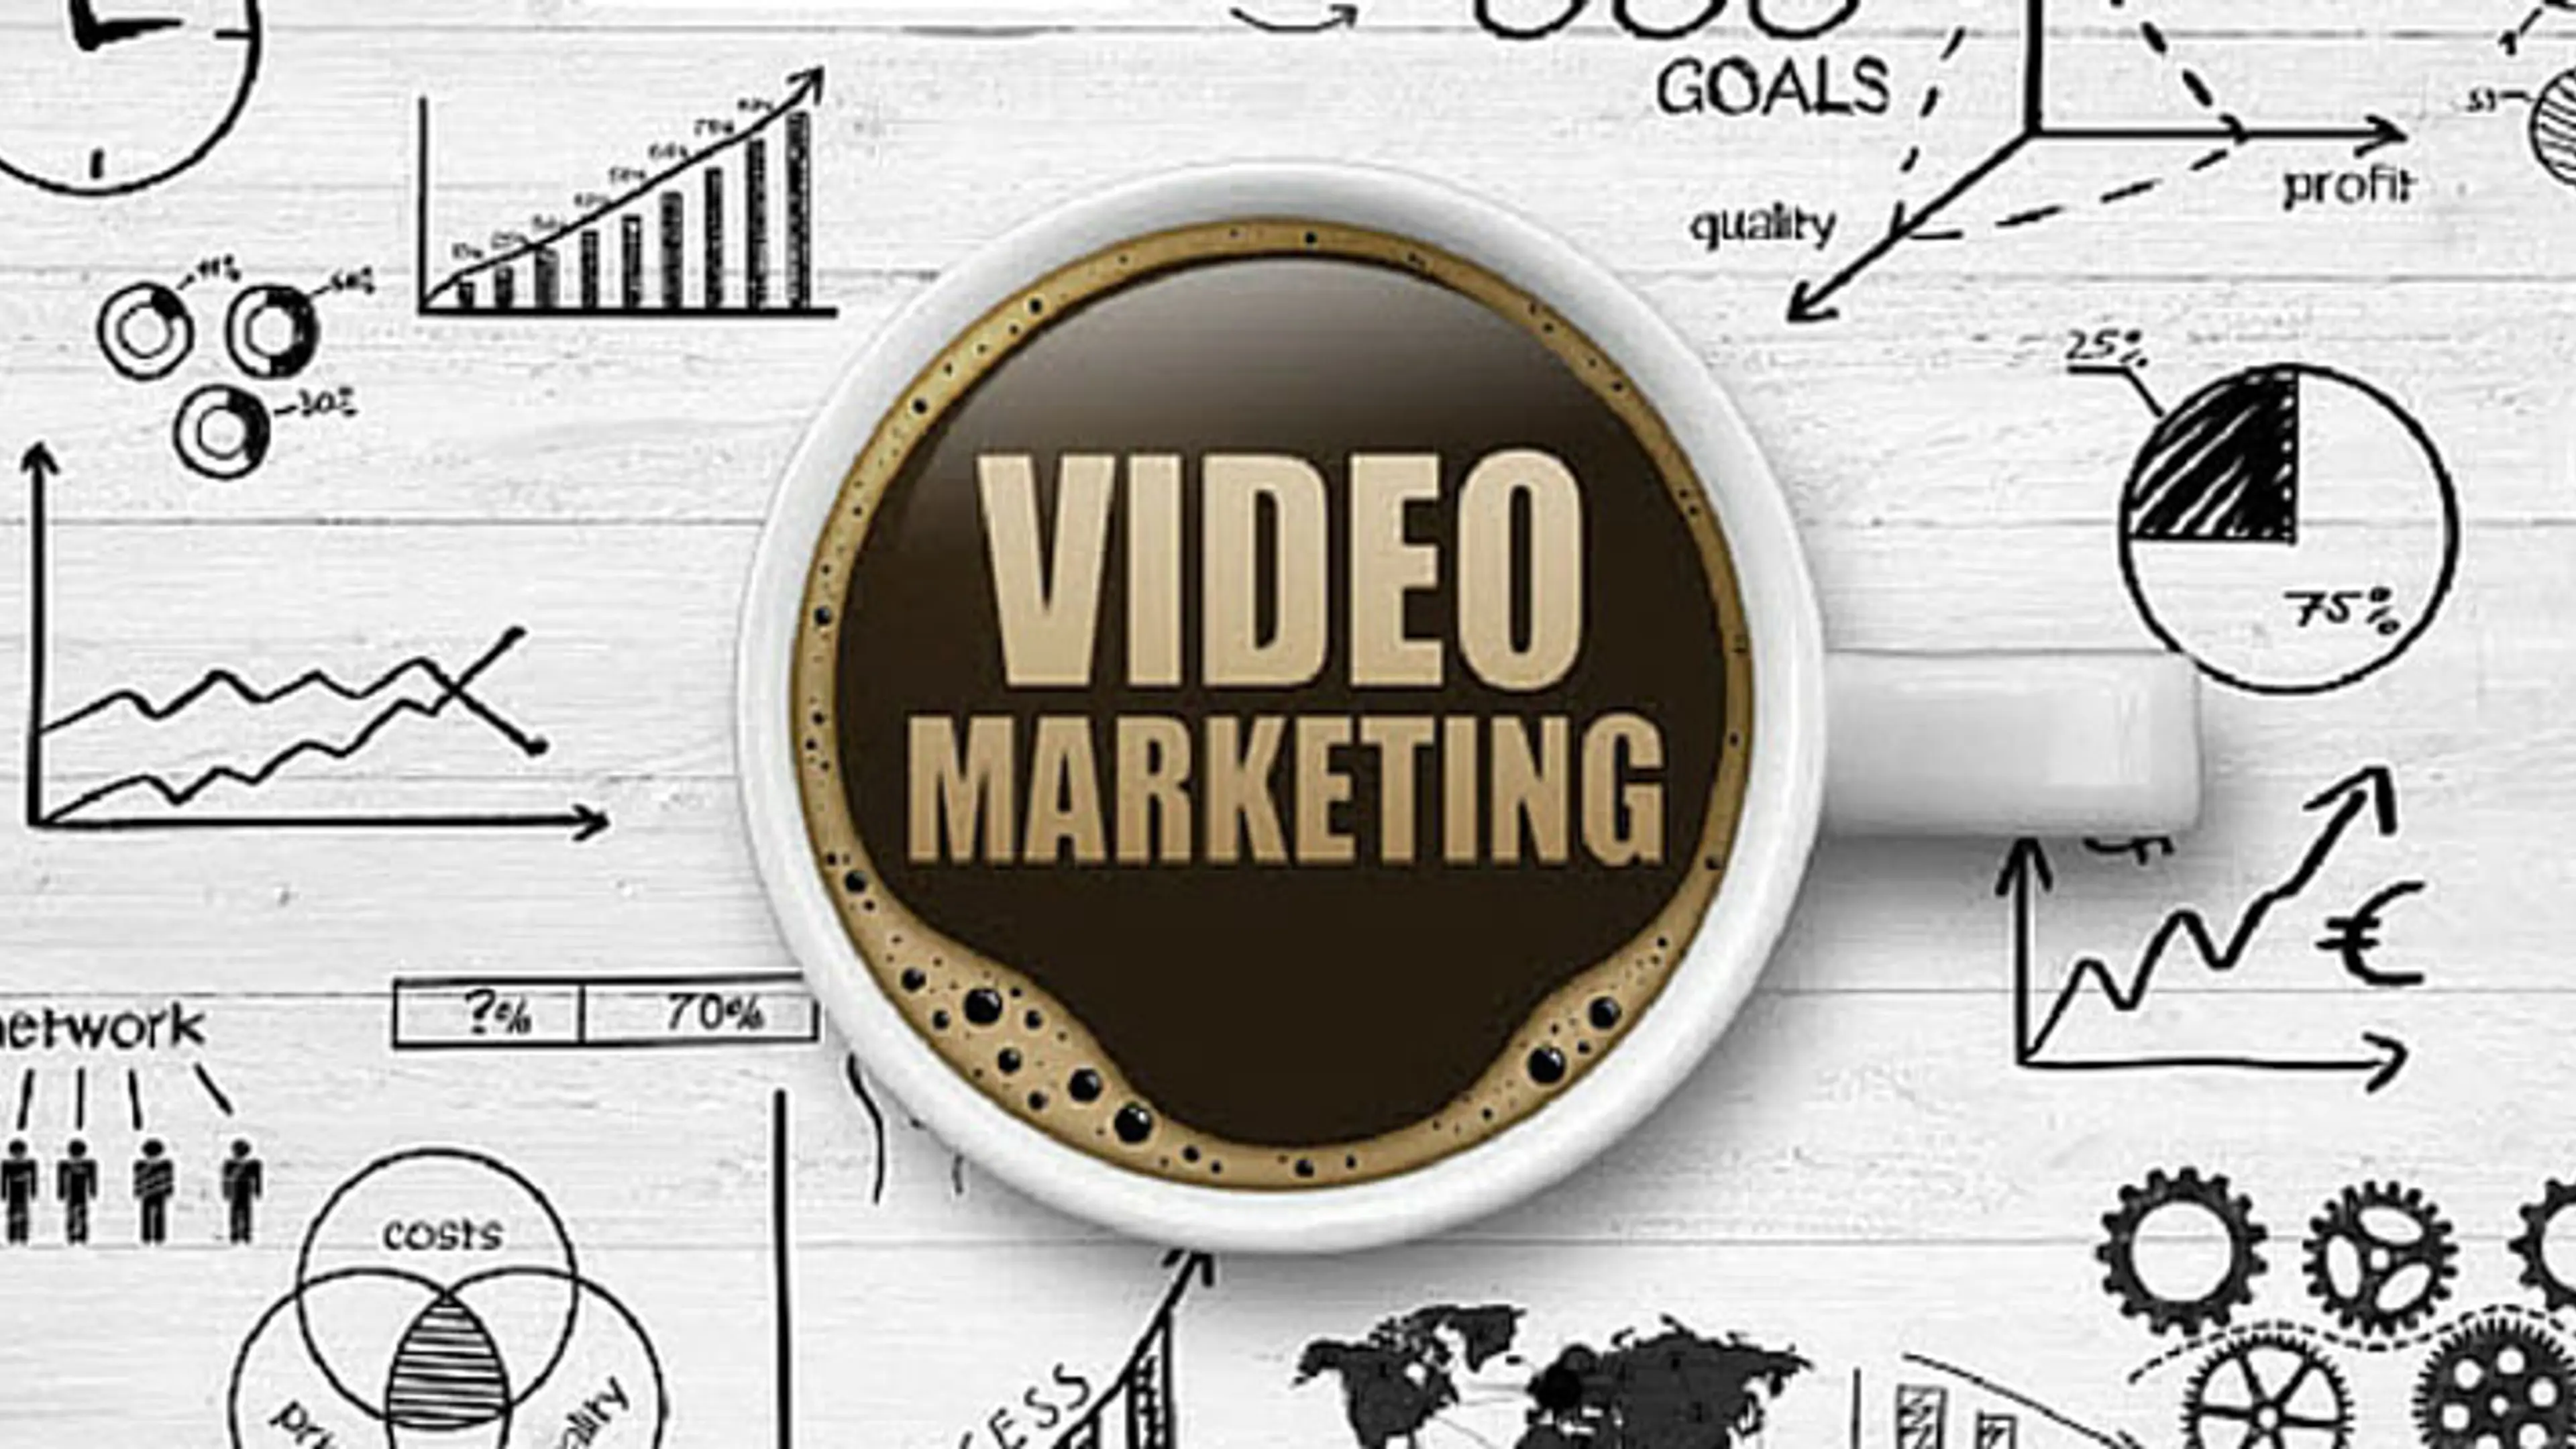 9 affordable video marketing strategies for startups in 2016